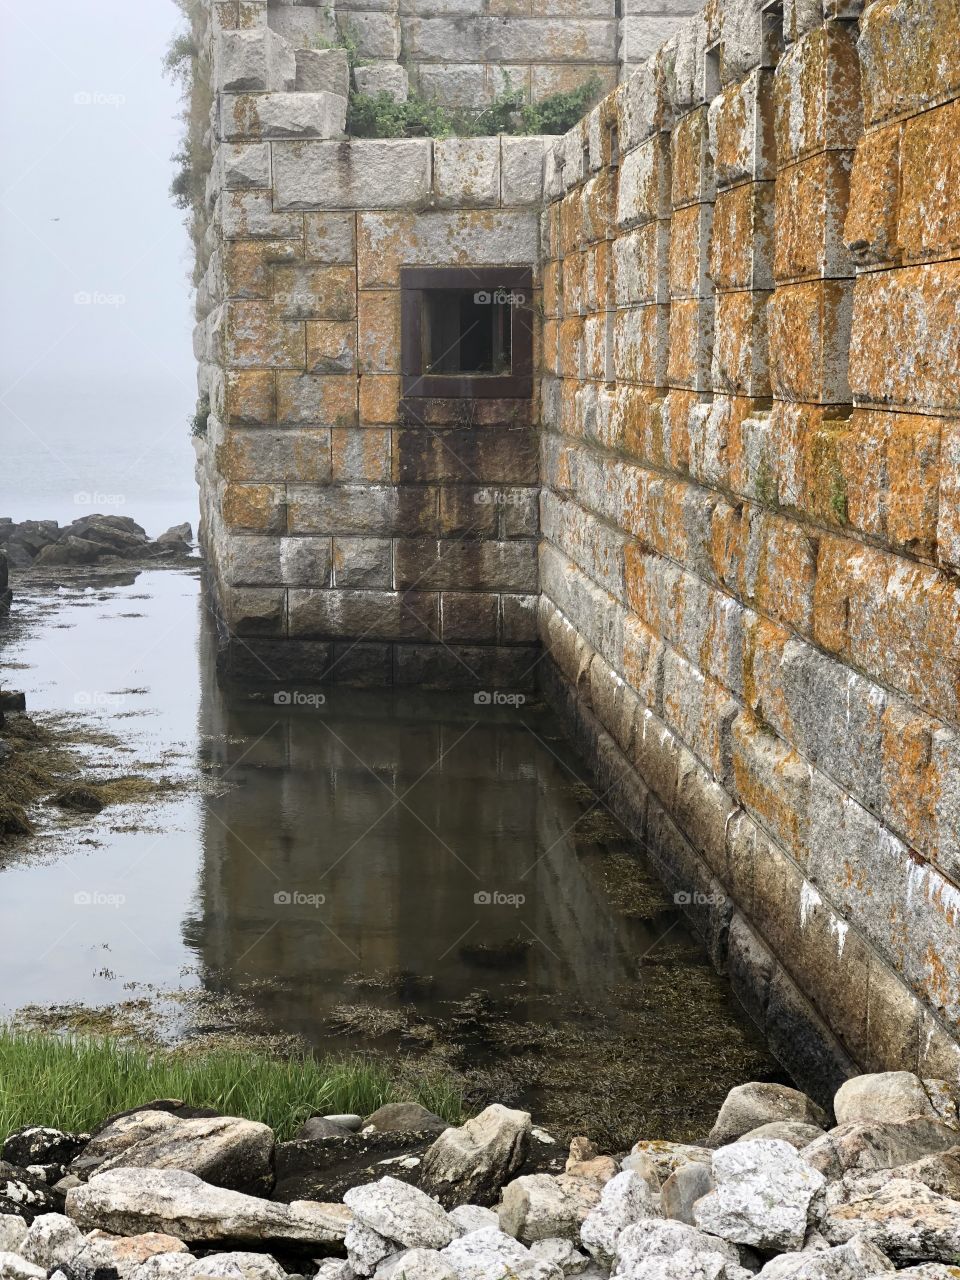 Could you ever escape from a place like this? The water becomes a murky afterthought as the rundown fort begins to look more like a prison than a shelter. 